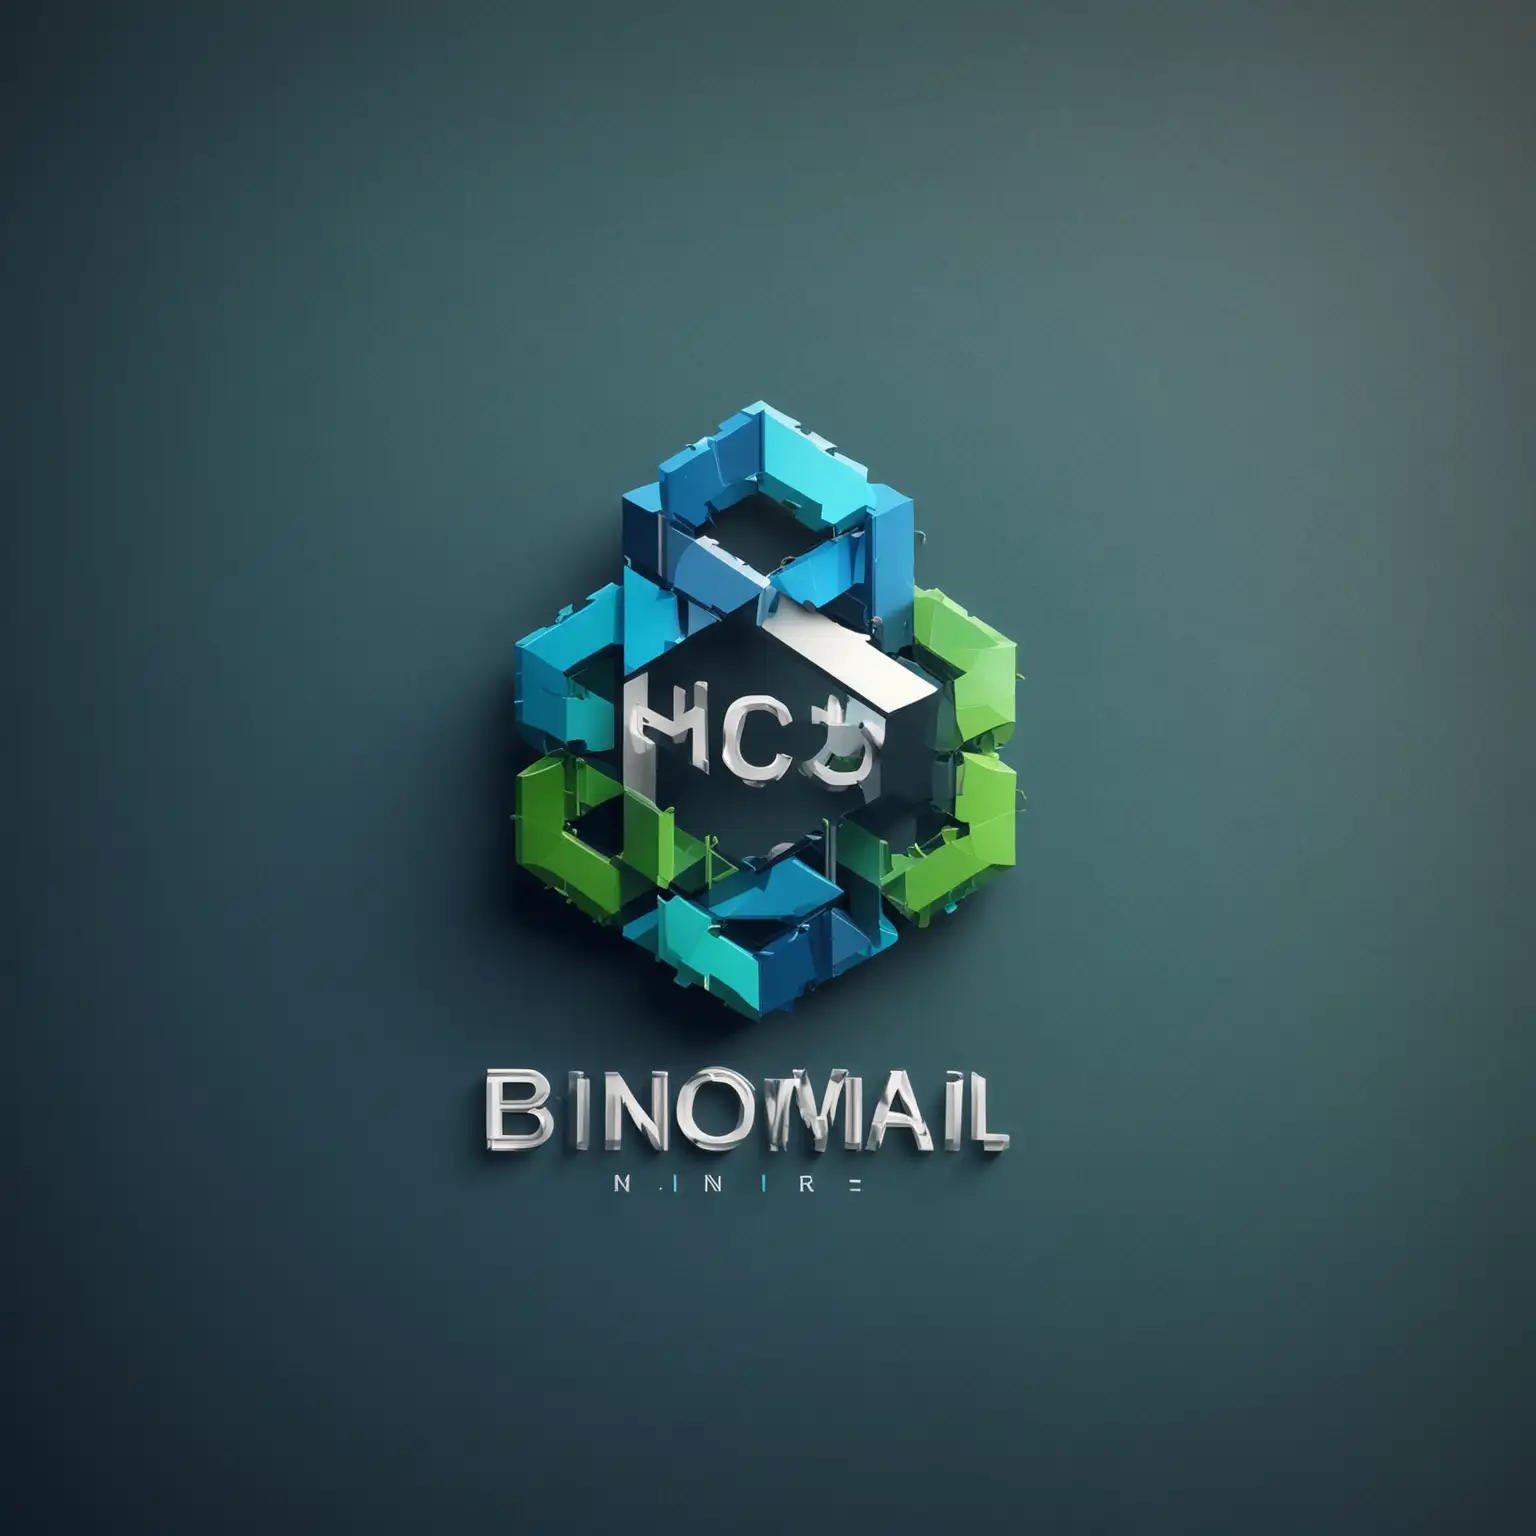 logo for a company, name Binomial, hedge fund, math, innovation, technology, high intelligence, solid, green and blue